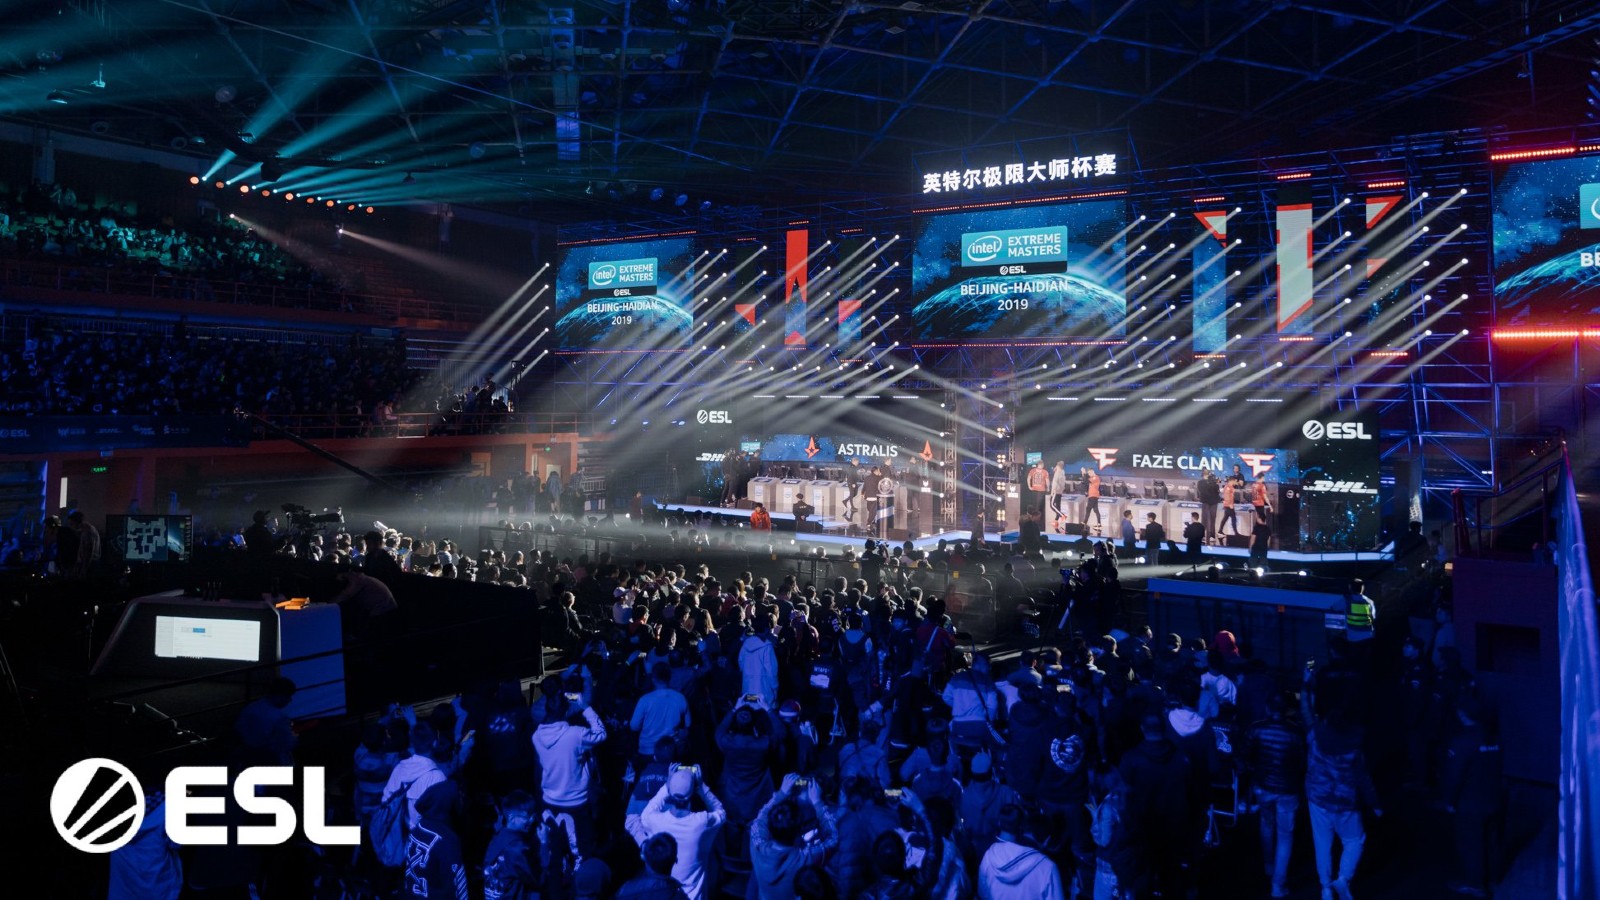 IEM Beijing-Haidian 2020 final placements and results - Dexerto